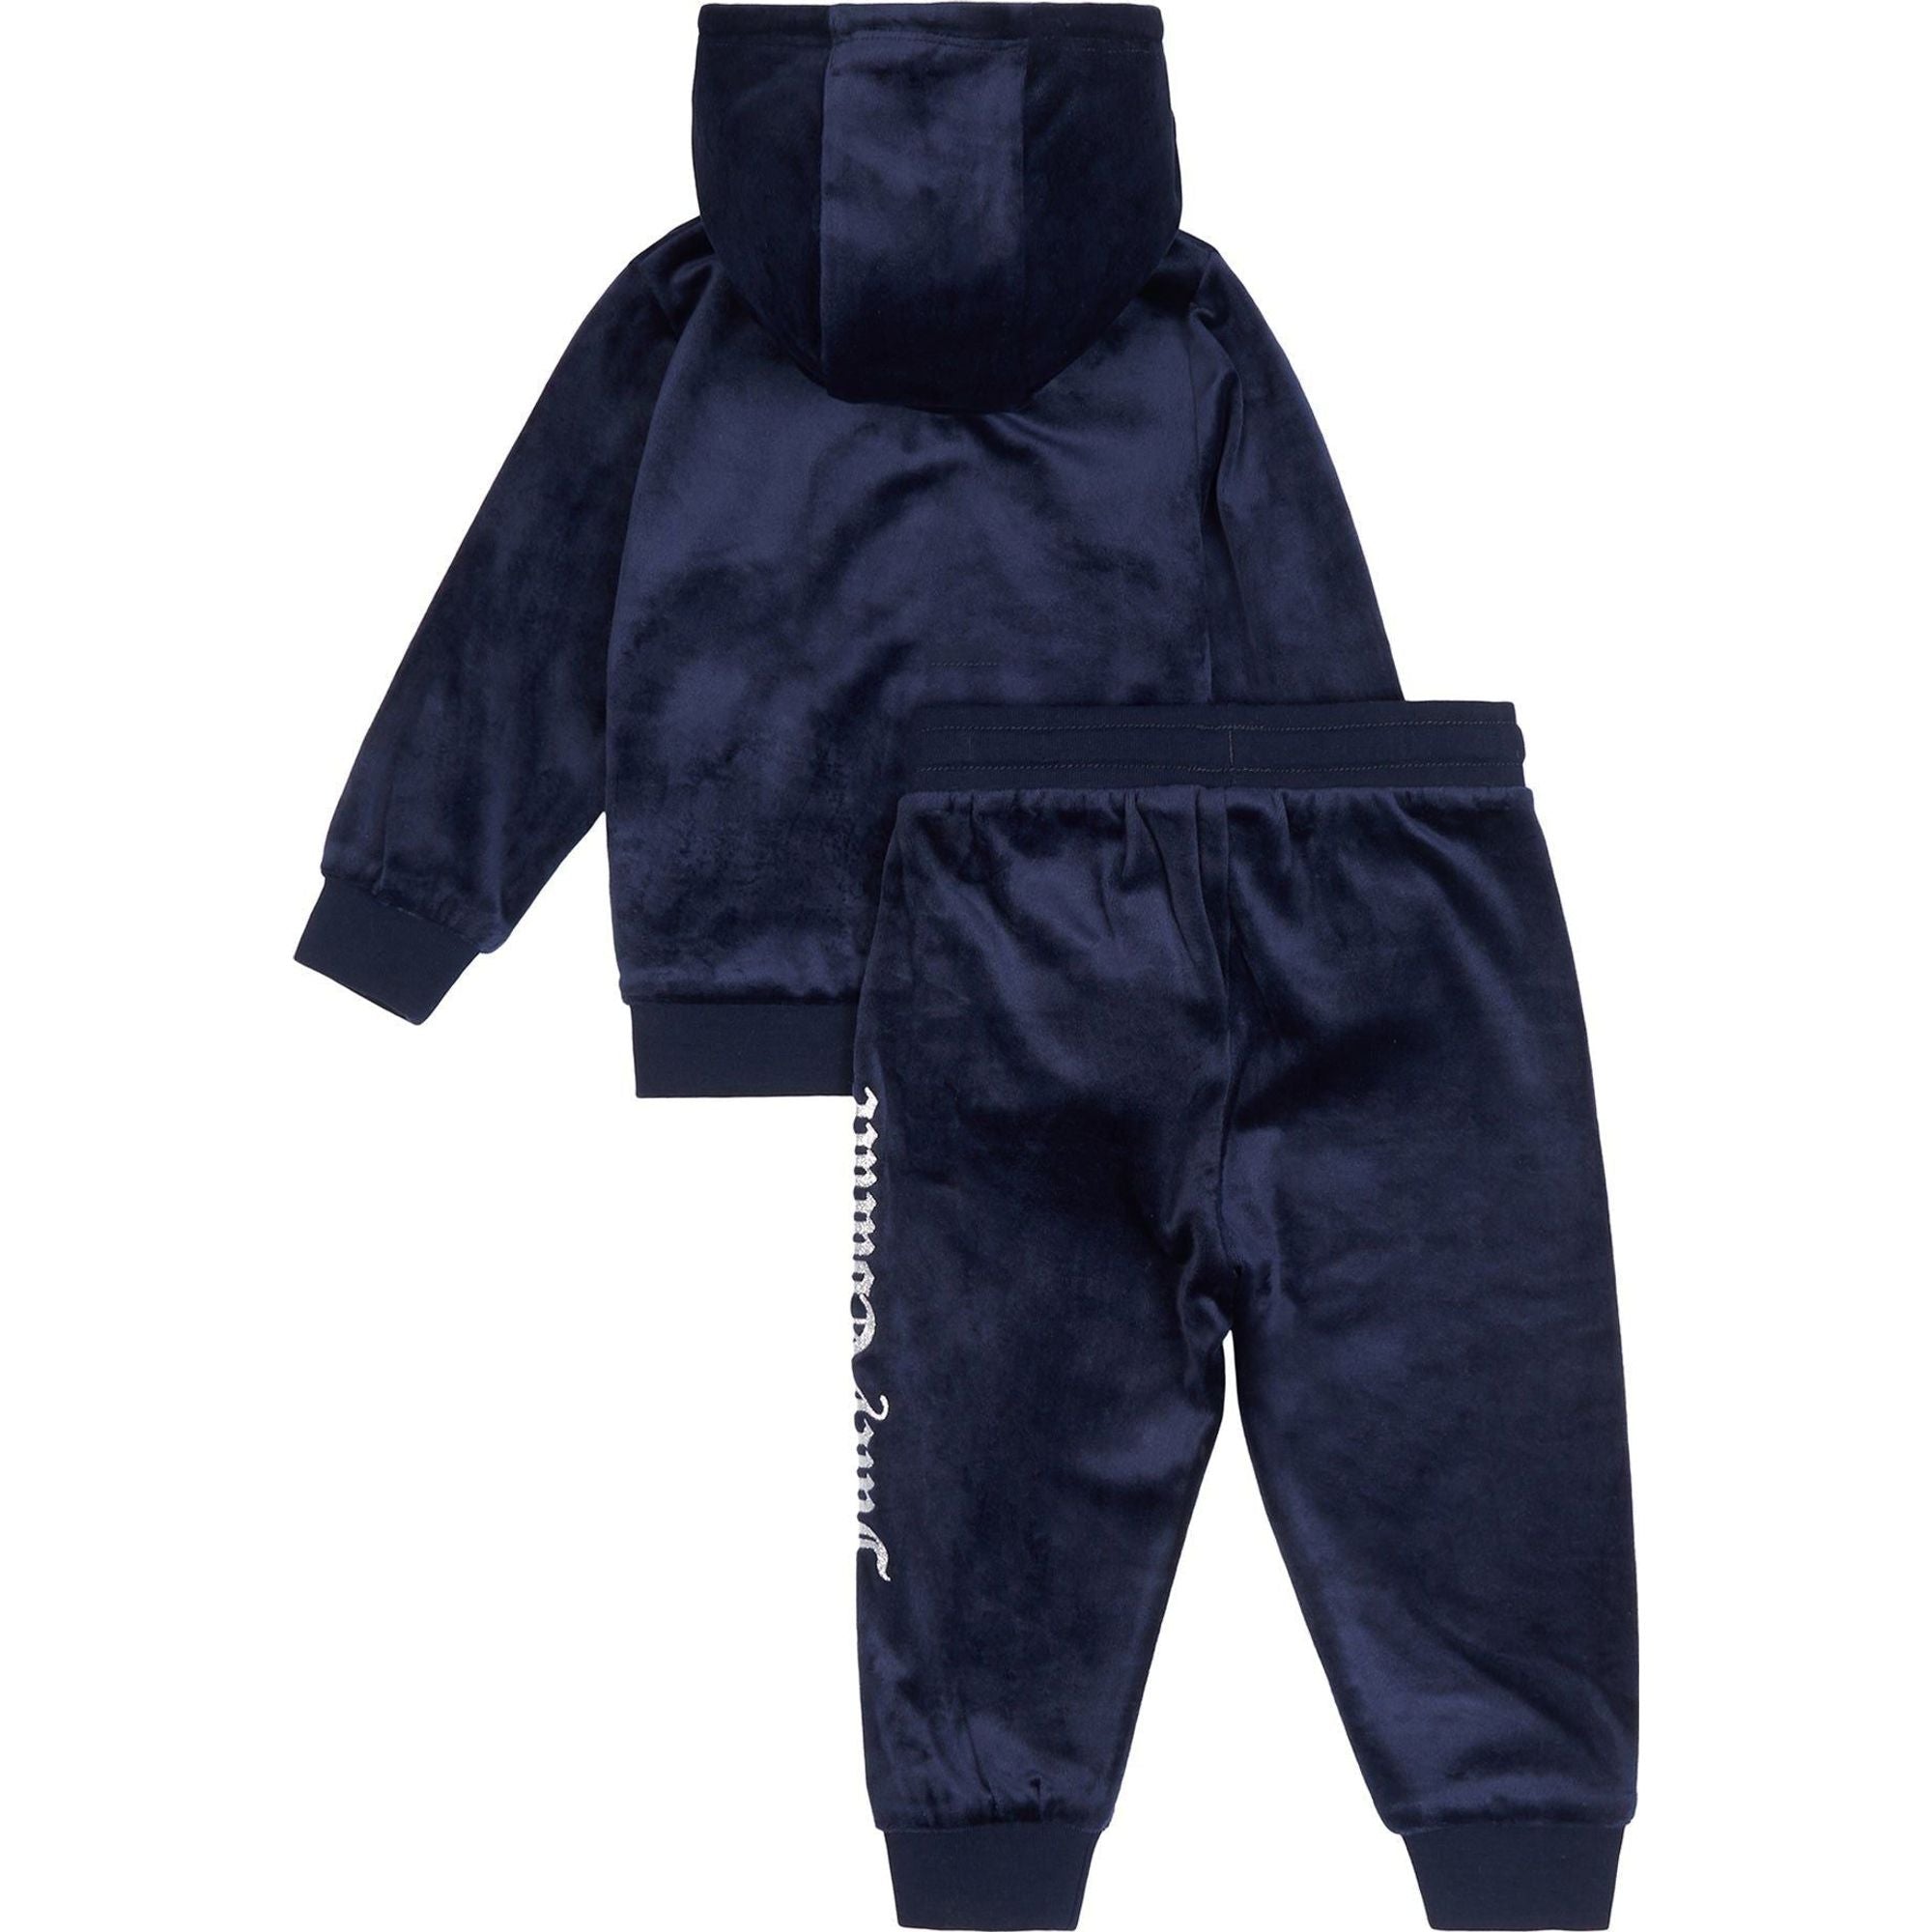 Juicy Couture Velour FZ HD Trackuit BabyAlive & Dirty 